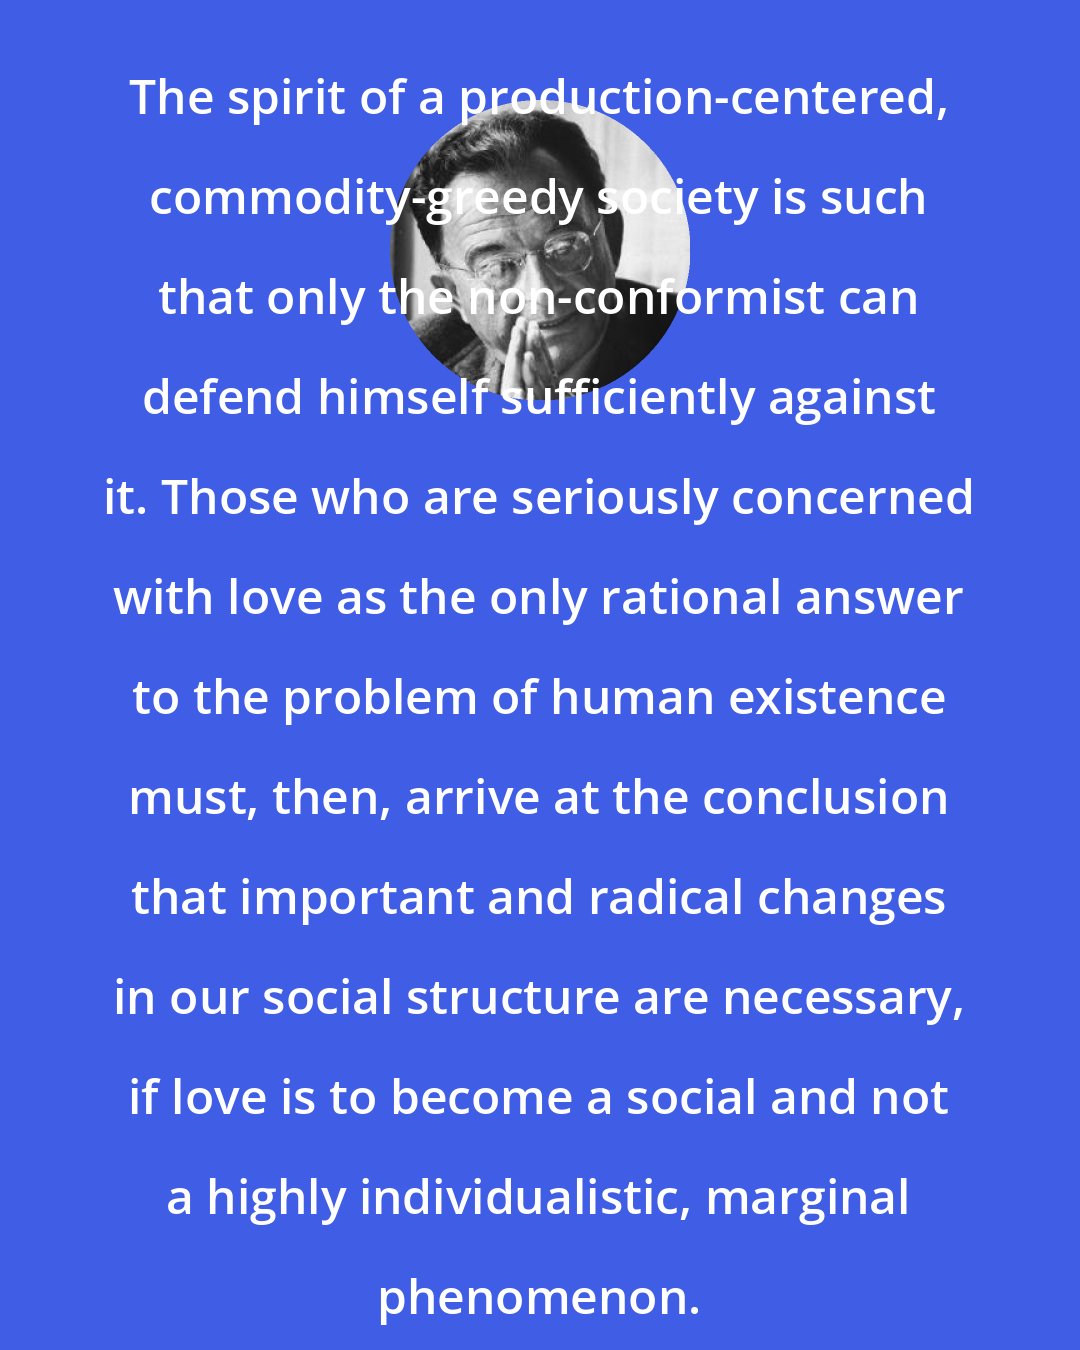 Erich Fromm: The spirit of a production-centered, commodity-greedy society is such that only the non-conformist can defend himself sufficiently against it. Those who are seriously concerned with love as the only rational answer to the problem of human existence must, then, arrive at the conclusion that important and radical changes in our social structure are necessary, if love is to become a social and not a highly individualistic, marginal phenomenon.